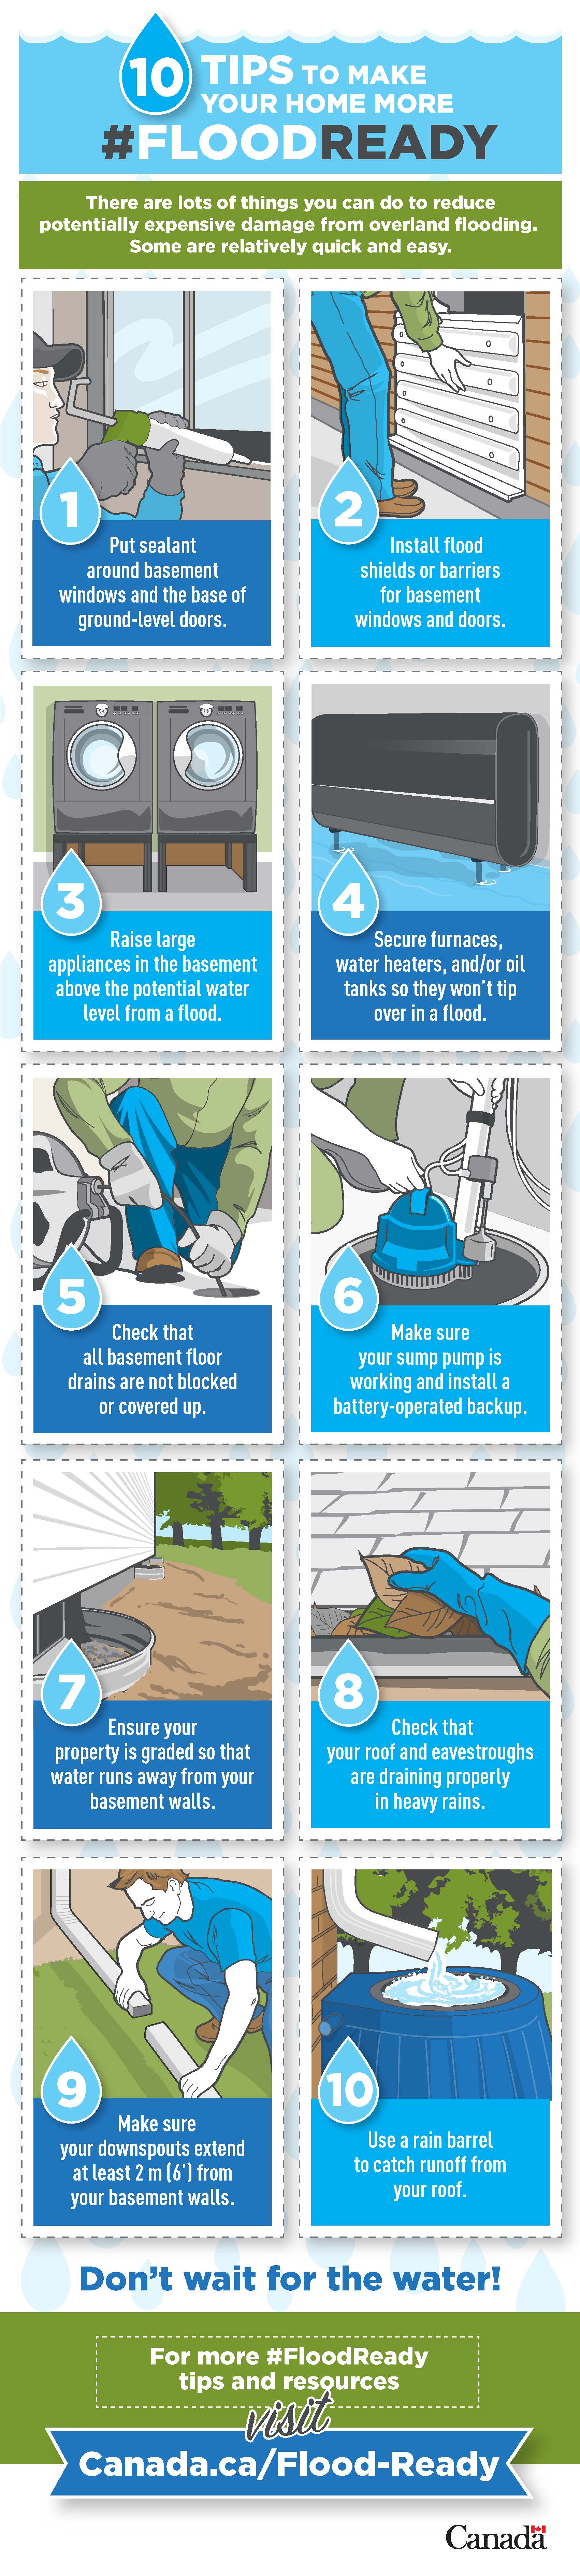 10 tips to make your home #floodready